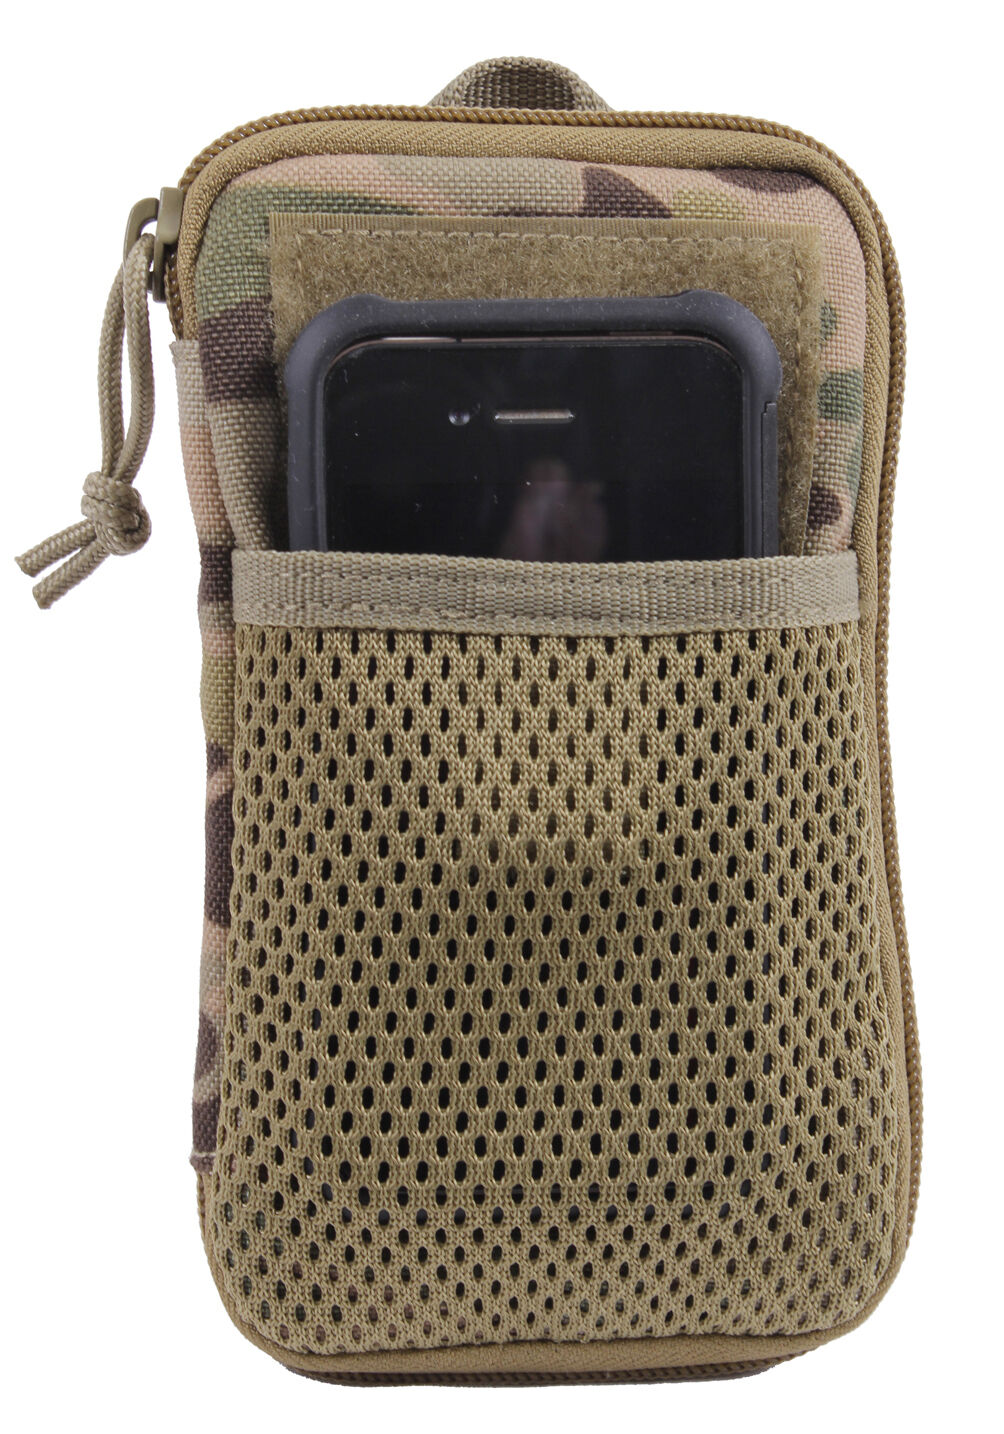 Rothco Tactical MOLLE EDC Wallet and Phone Pouch - Multicam Camo